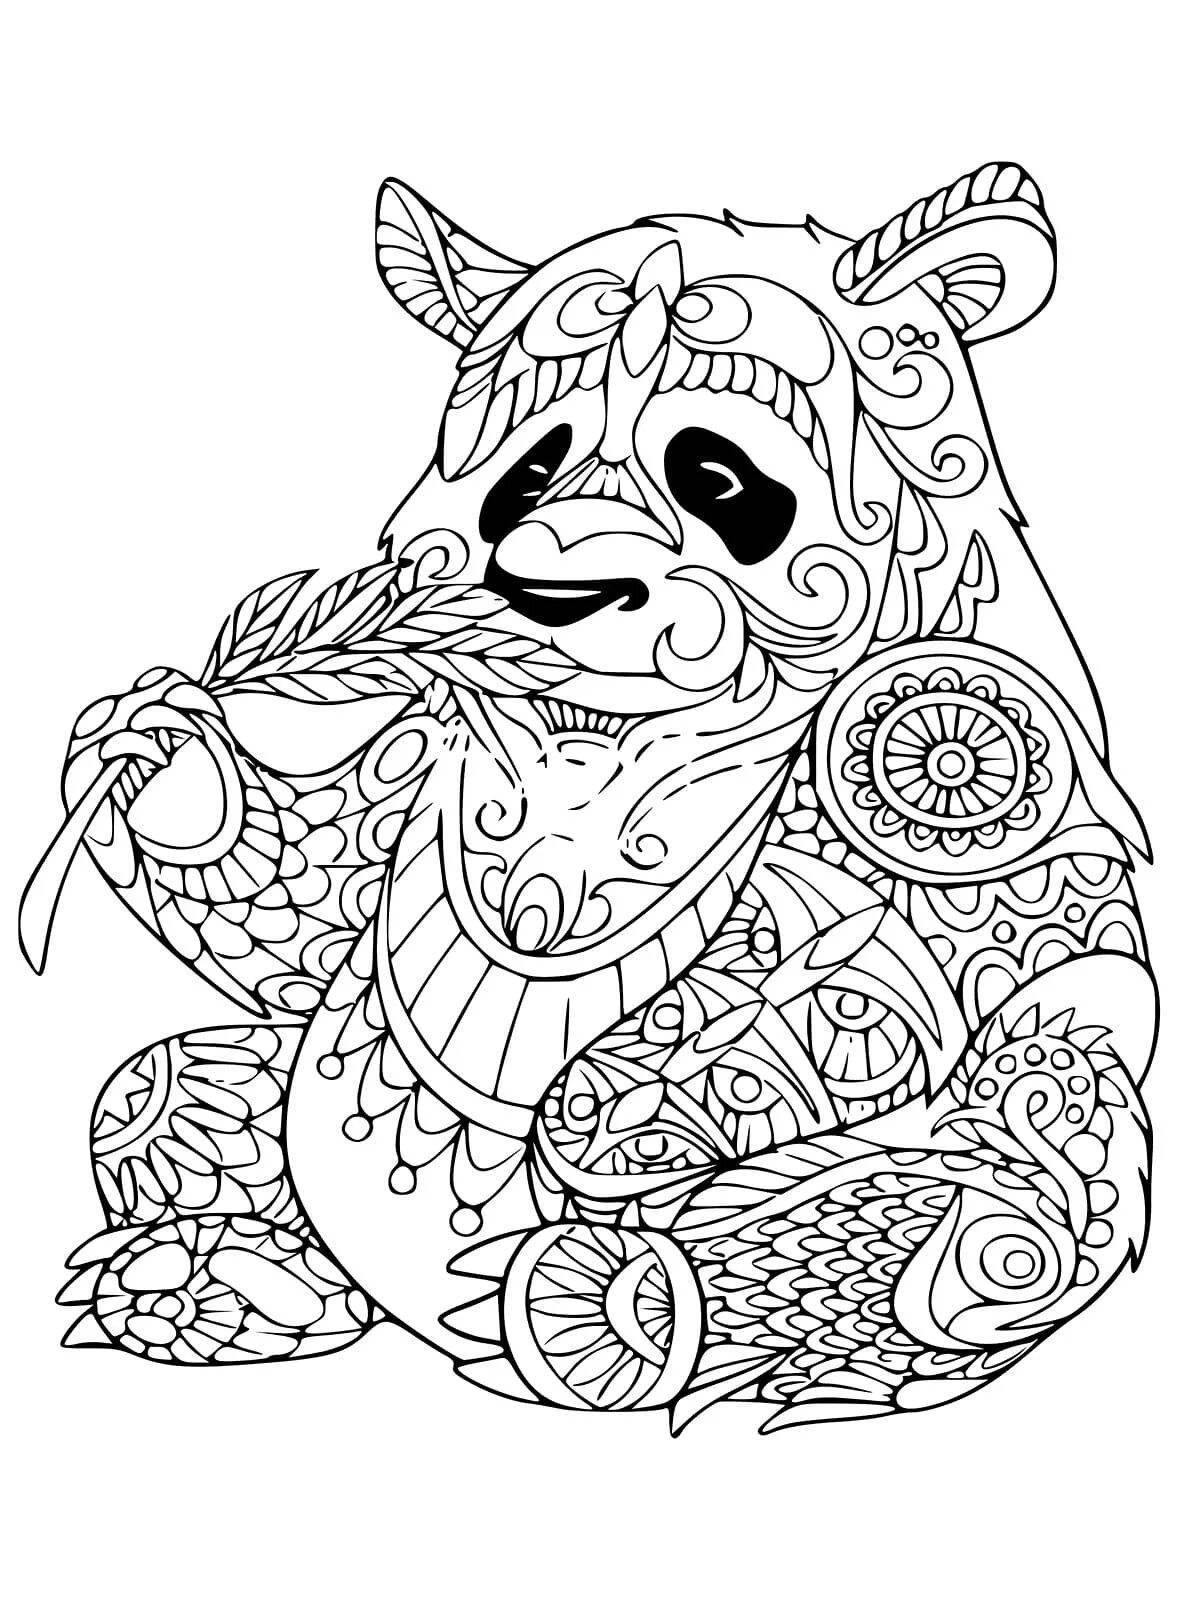 A fascinating anti-stress coloring book for children aged 5-6